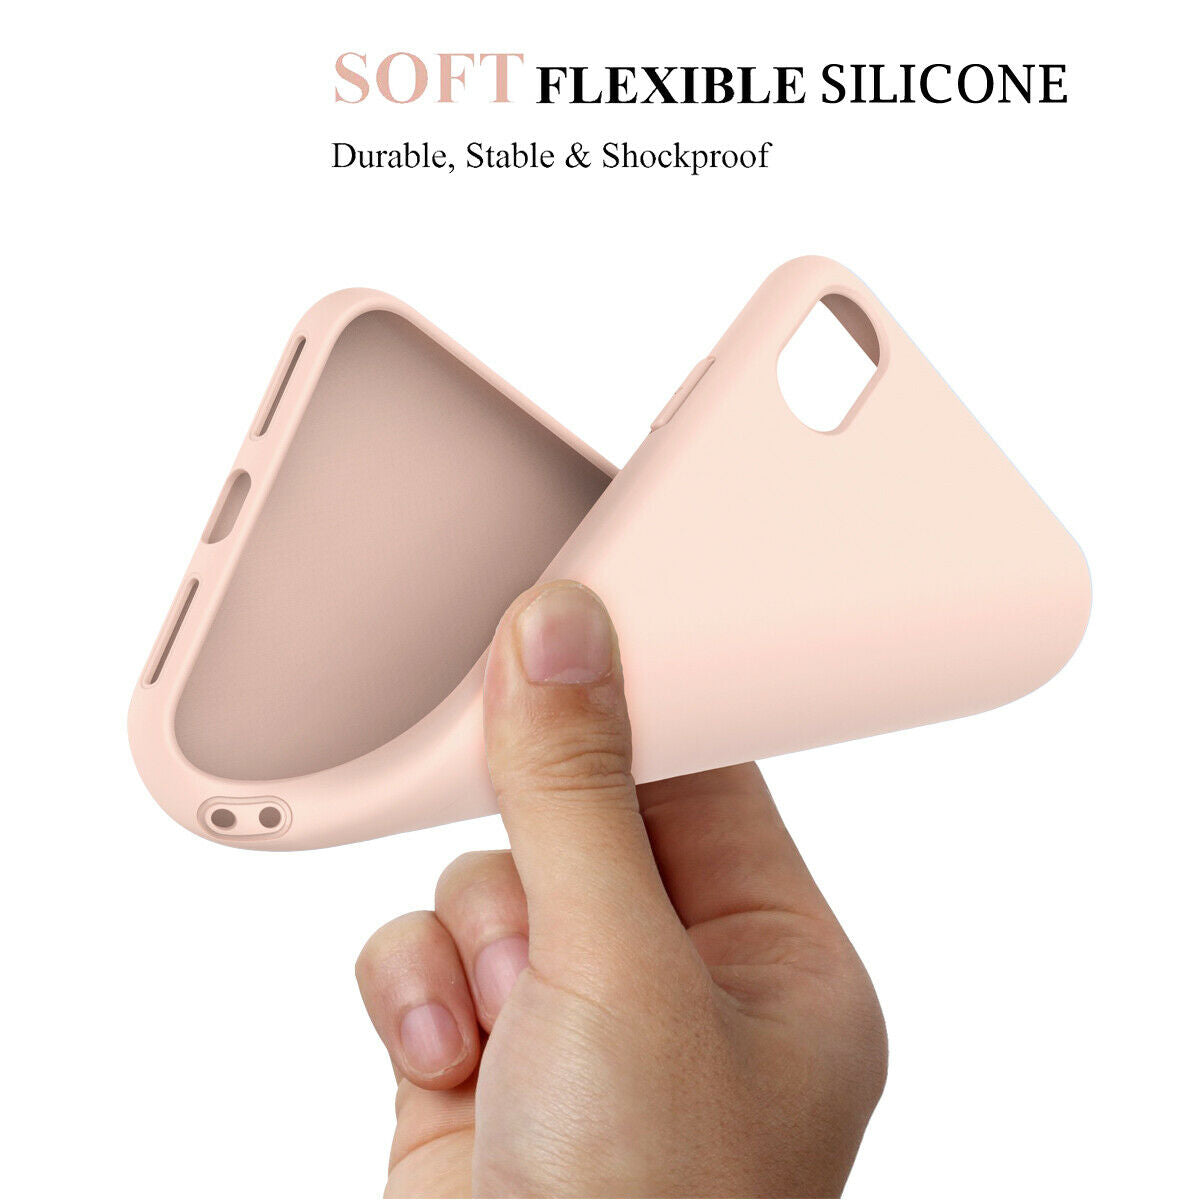 Soft Cover Silicone Case for iPhone - carolay.co